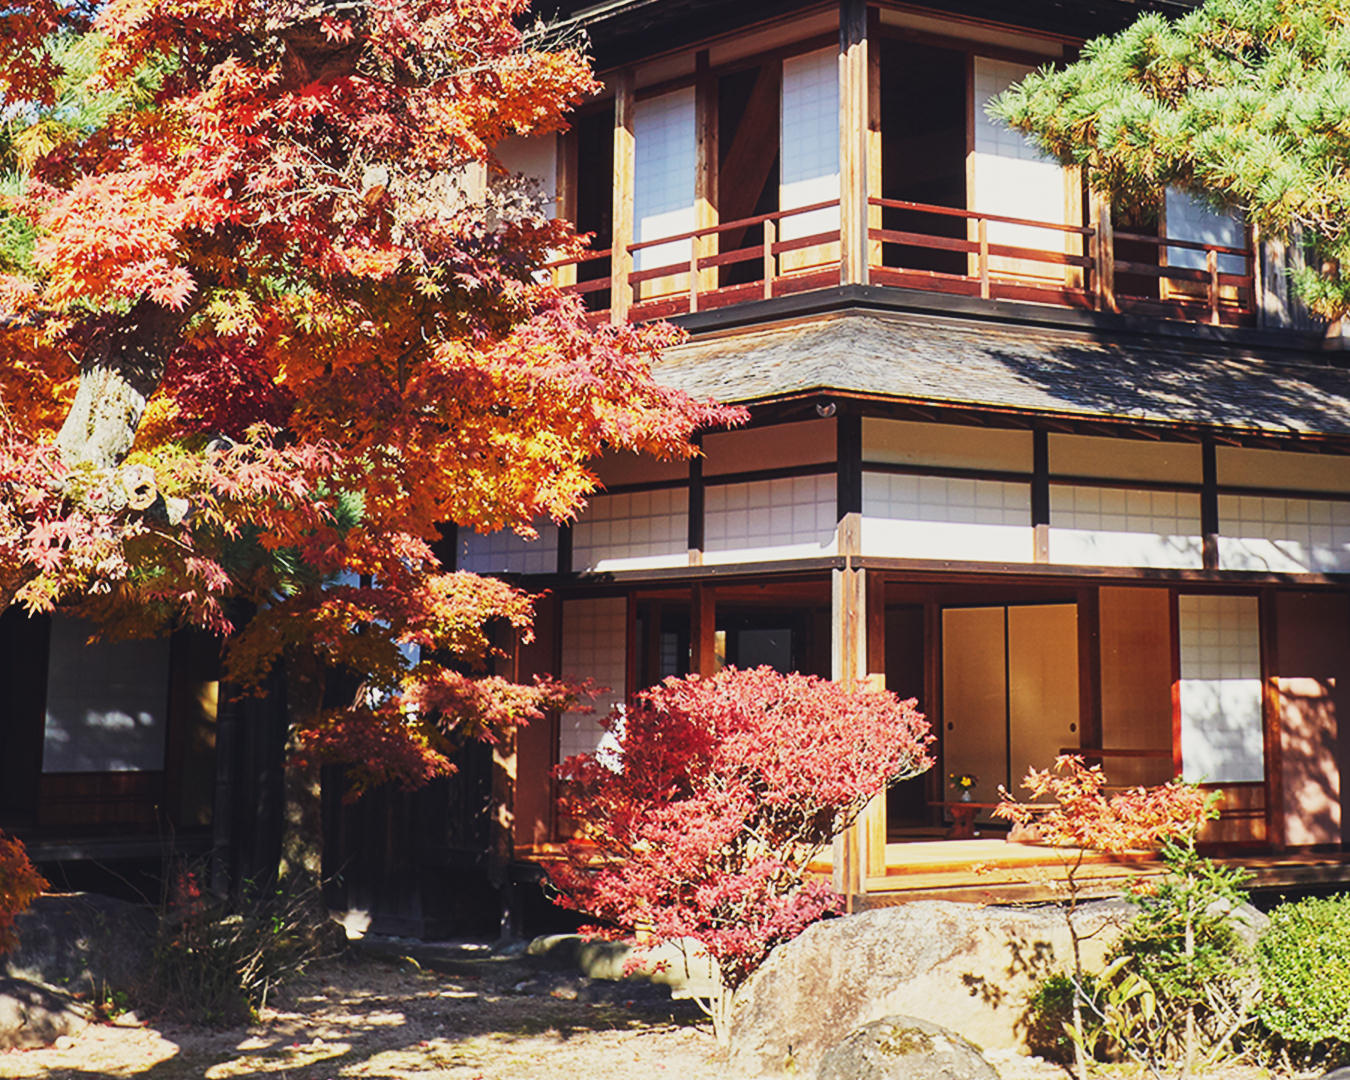 Takayama Jinya was actually in use for approximately 300 years until half a century ago